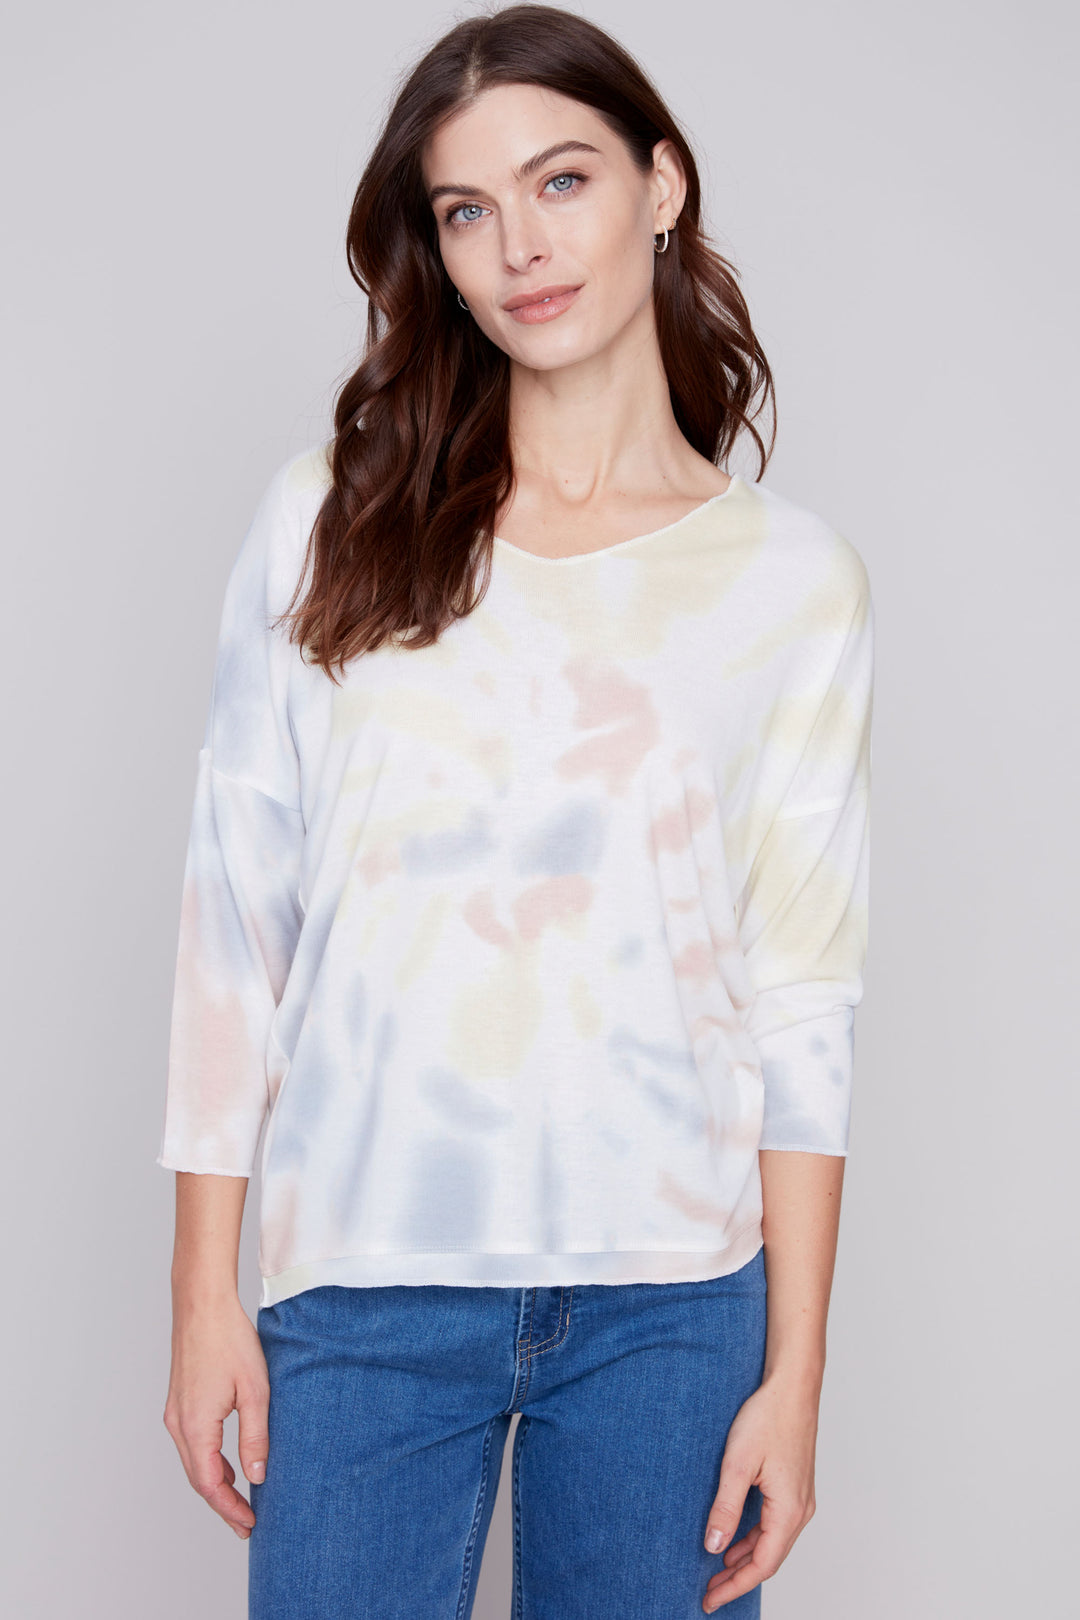 This effortless and comfortable tie dye top is the perfect addition for your summer wardrobe. It features a soft cut v-neck, relaxed fit long sleeves.